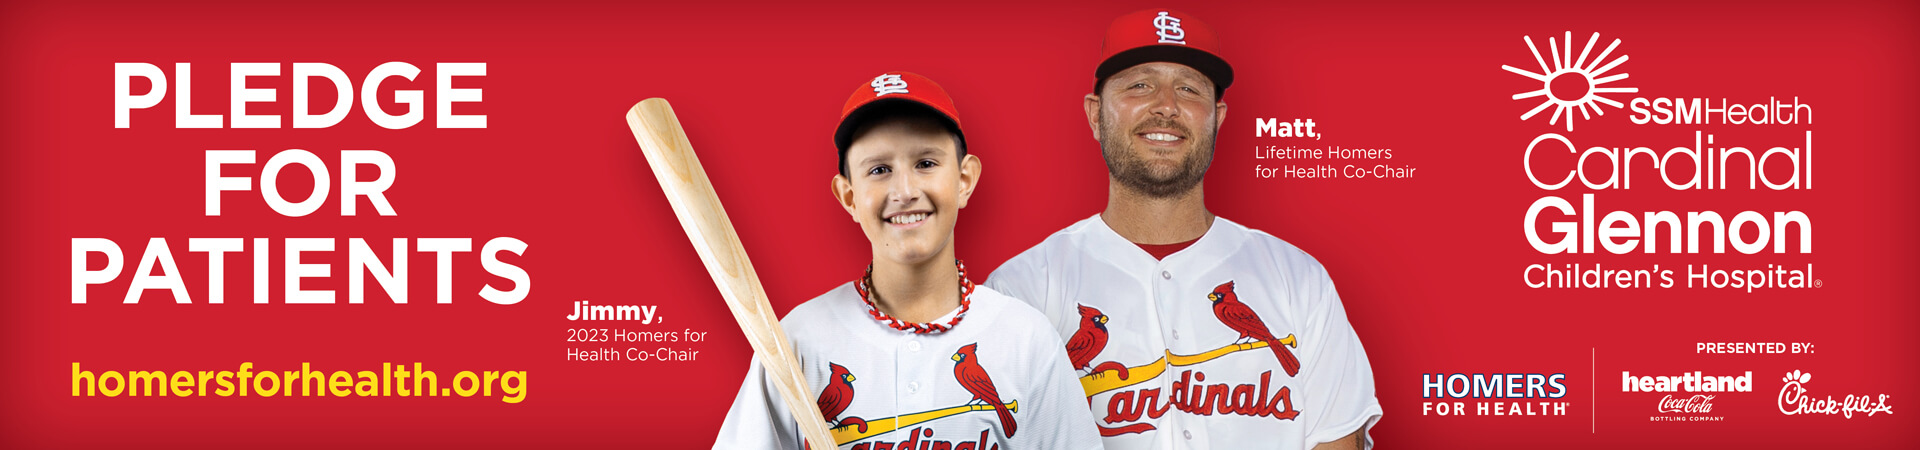 Pledge for Patients, Homers for Health - Patient Co-chair Jimmy and Lifetime Chairman Matt Holliday